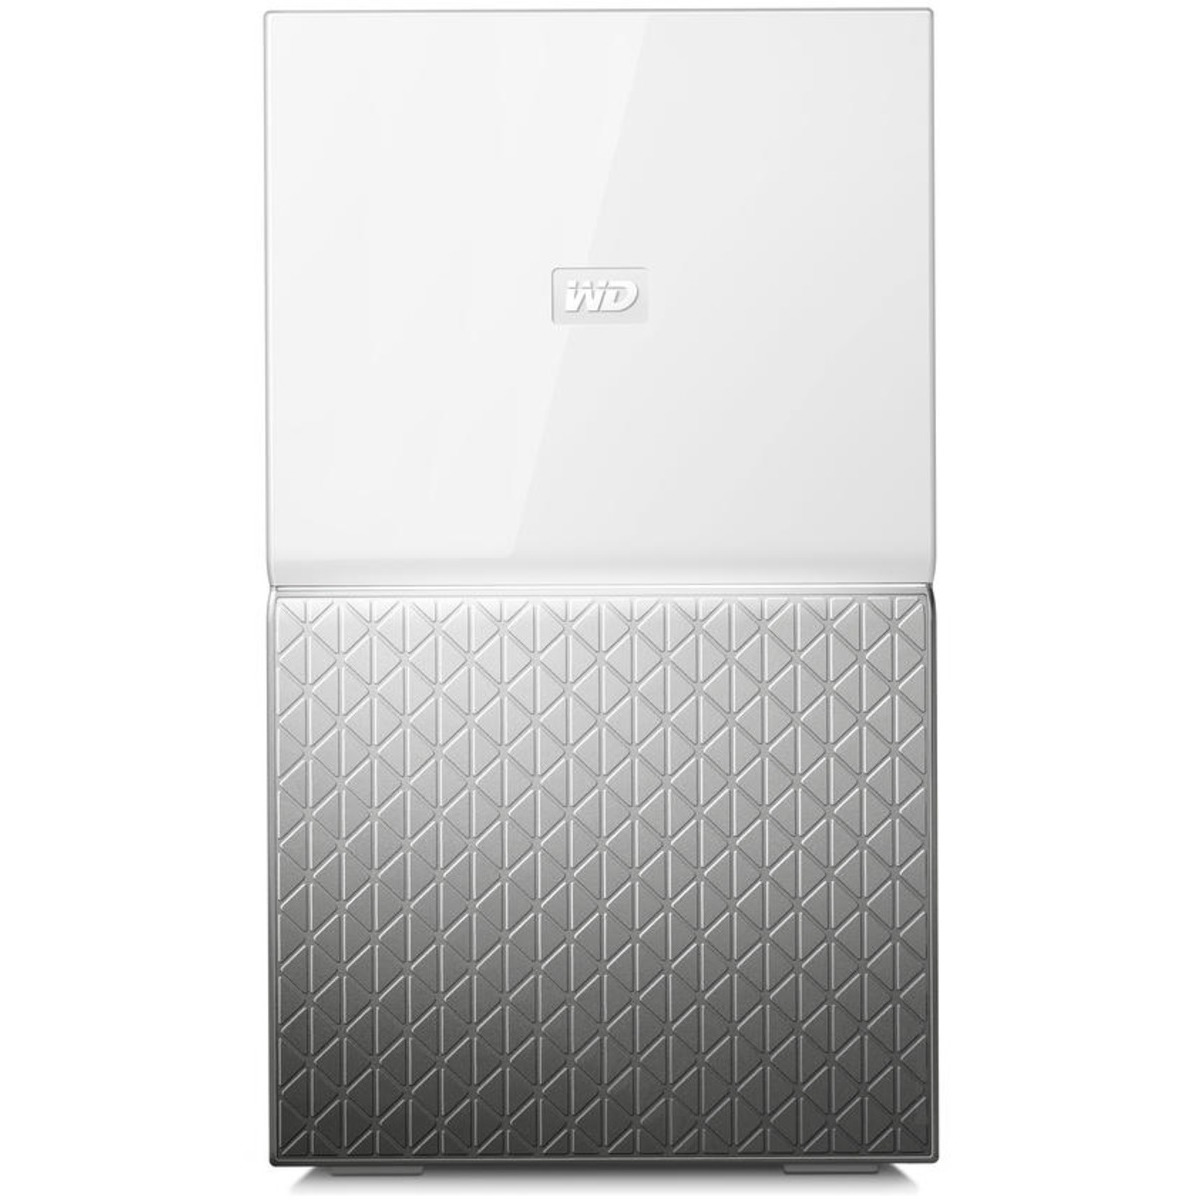 Western Digital My Cloud Home Duo 8tb 2-Bay Desktop Personal / Basic Home / Small Office DAS - Direct Attached Storage Device 2x4tb Western Digital Gold WD4004FRYZ 3.5 7200rpm SATA 6Gb/s HDD ENTERPRISE Class Drives Installed - Burn-In Tested My Cloud Home Duo